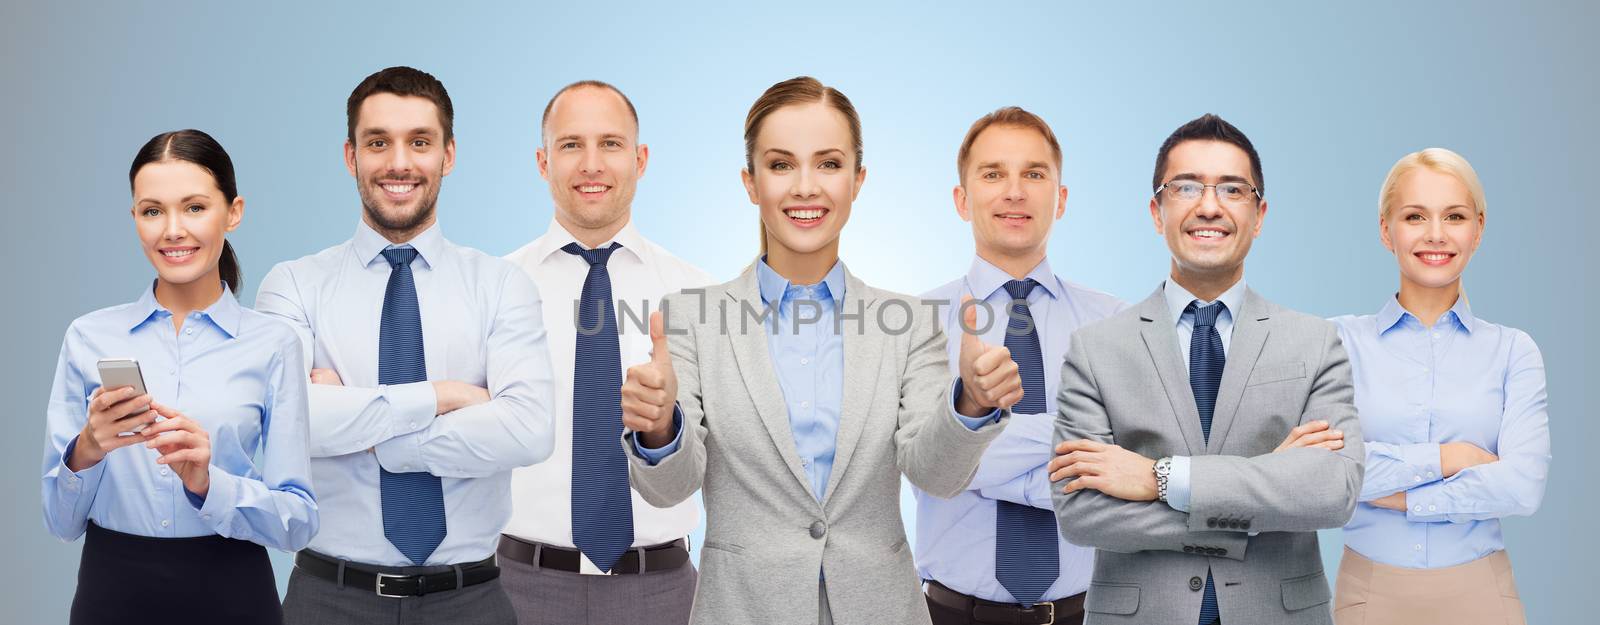 group of happy businesspeople showing thumbs up by dolgachov